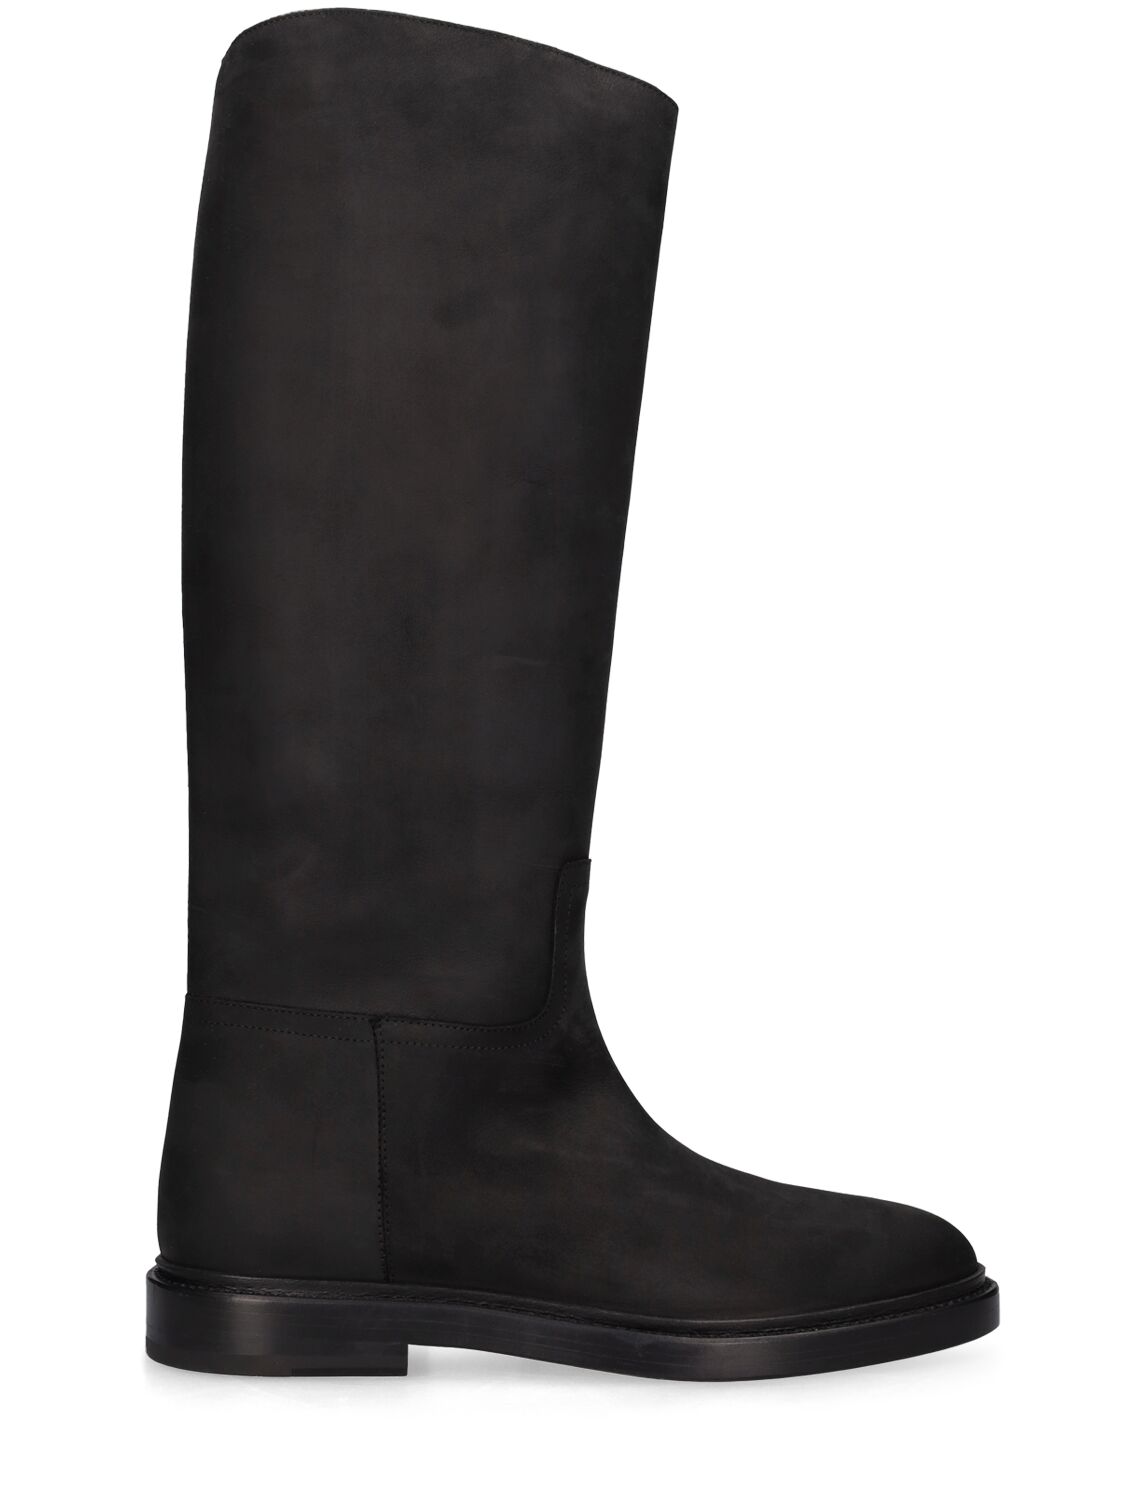 30mm Leather Tall Boots